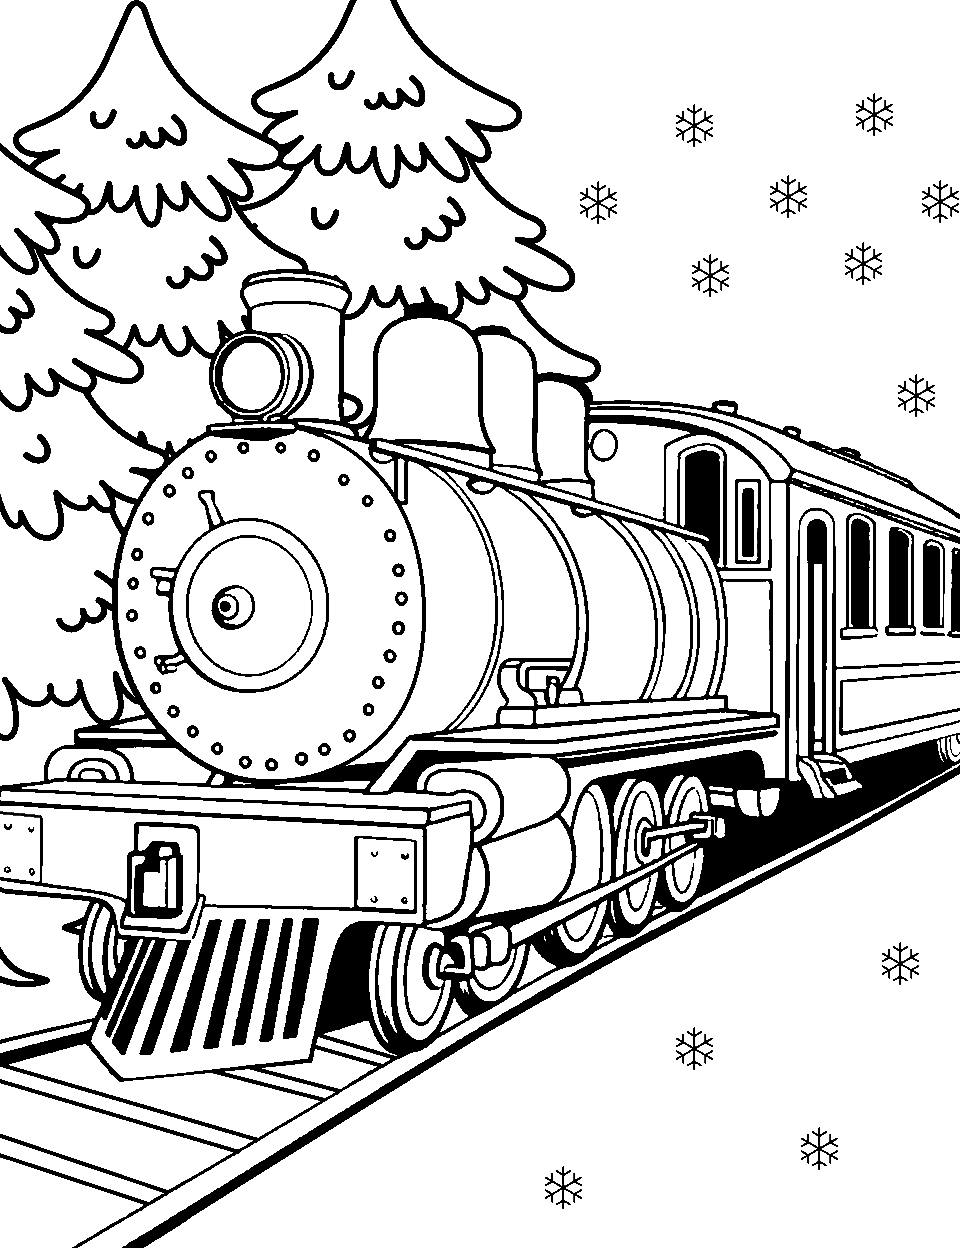 Winter Wonderland Train Coloring Page - A train passing through a snowy, winter wonderland.